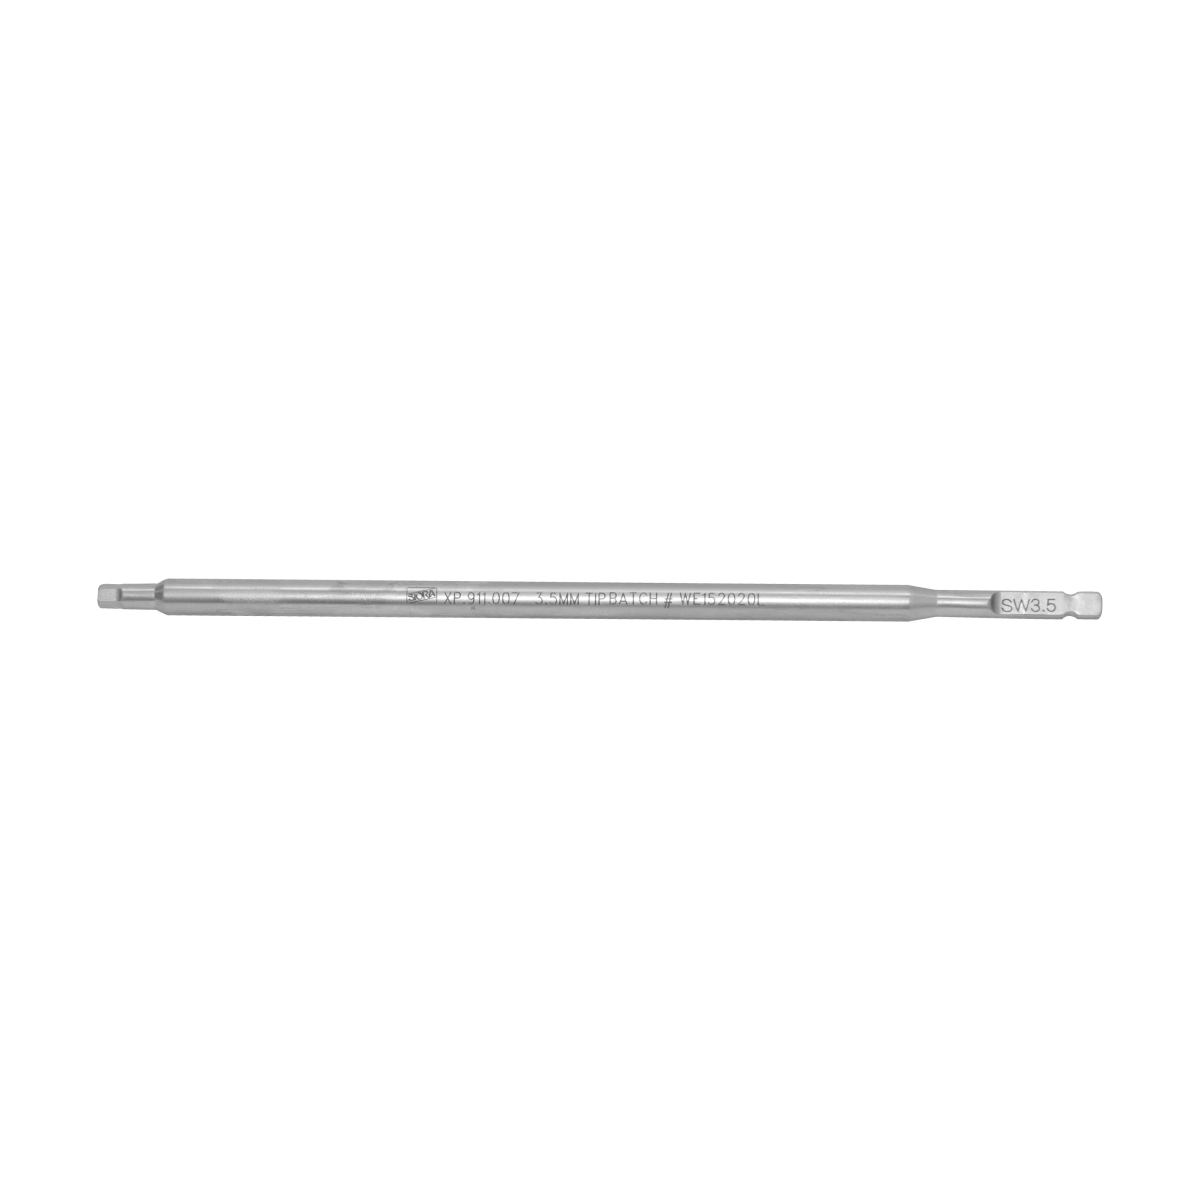 Hexagonal-Screw-Driver-Q.C-end-Shaft-3.5mm-Tip-for-Torque-Handle-4.0Nm.png